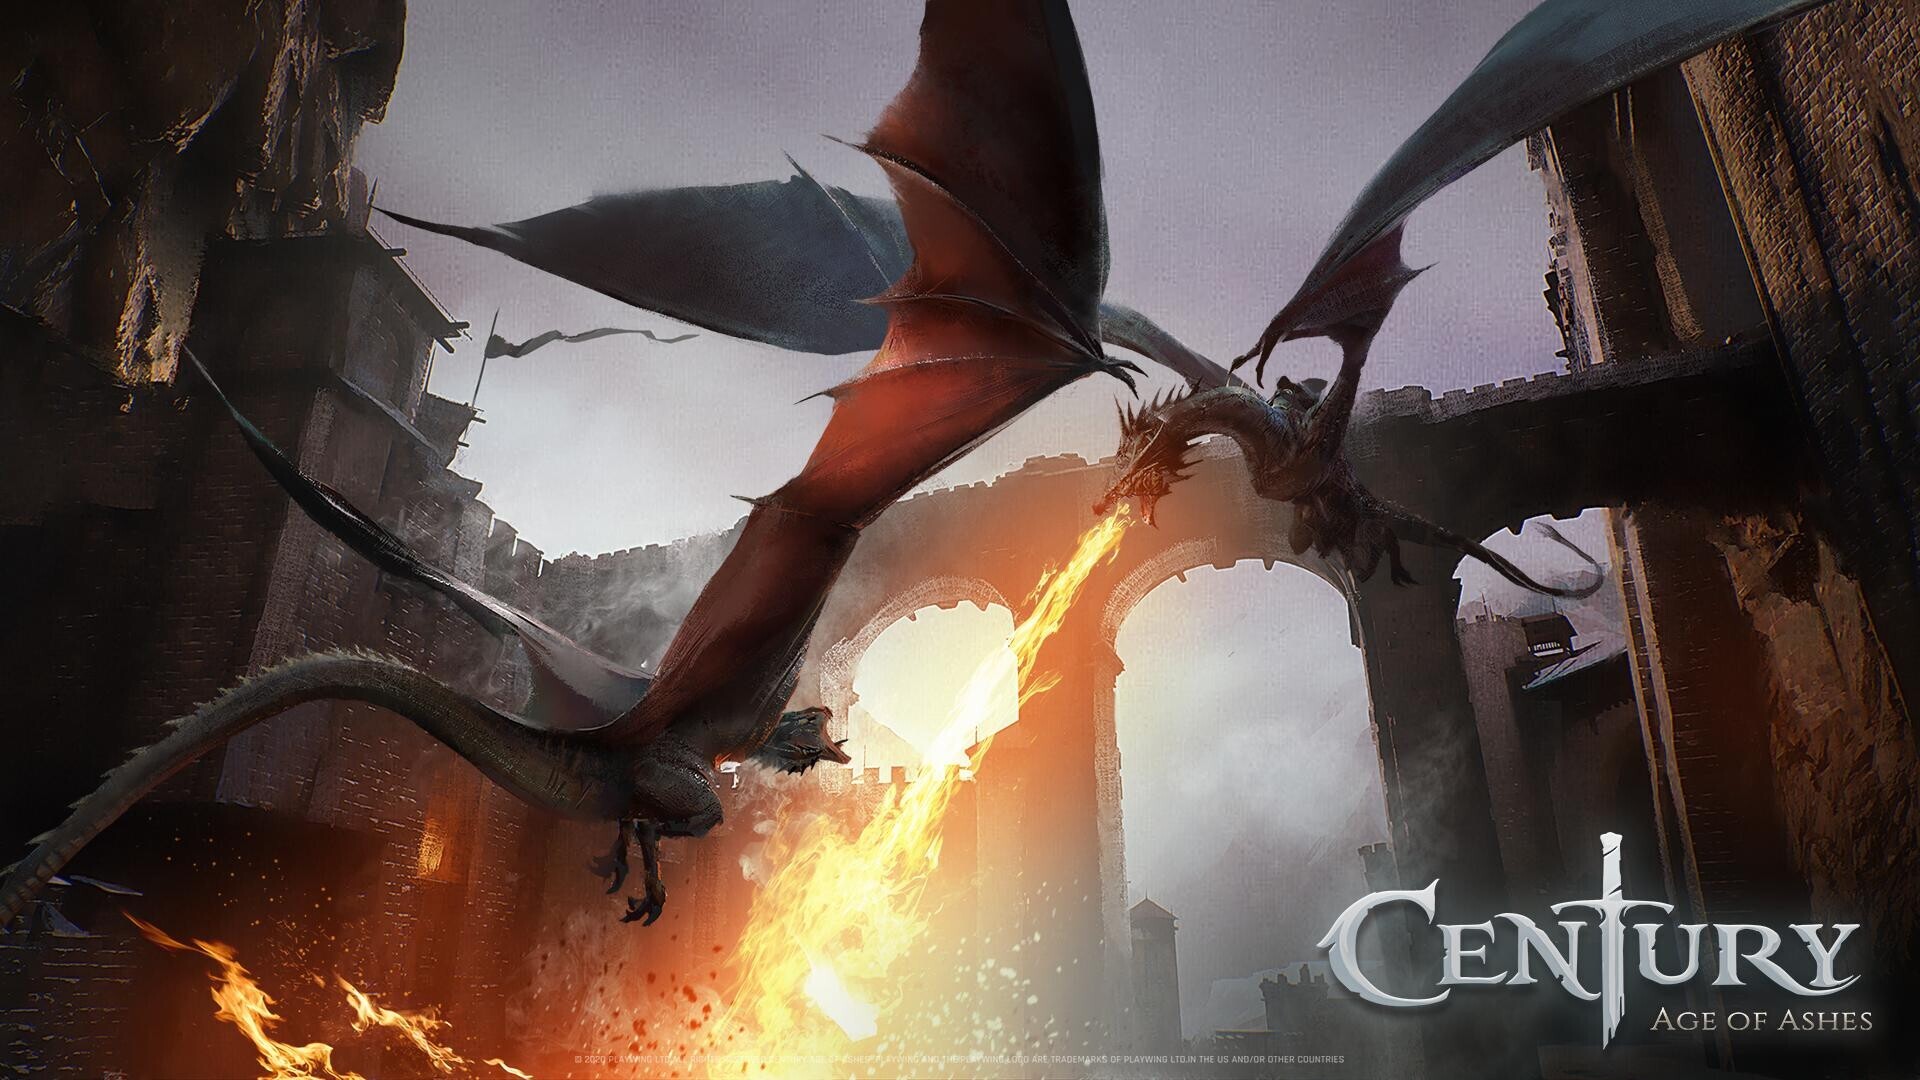 Century Age of Ashes 2020 Wallpapers